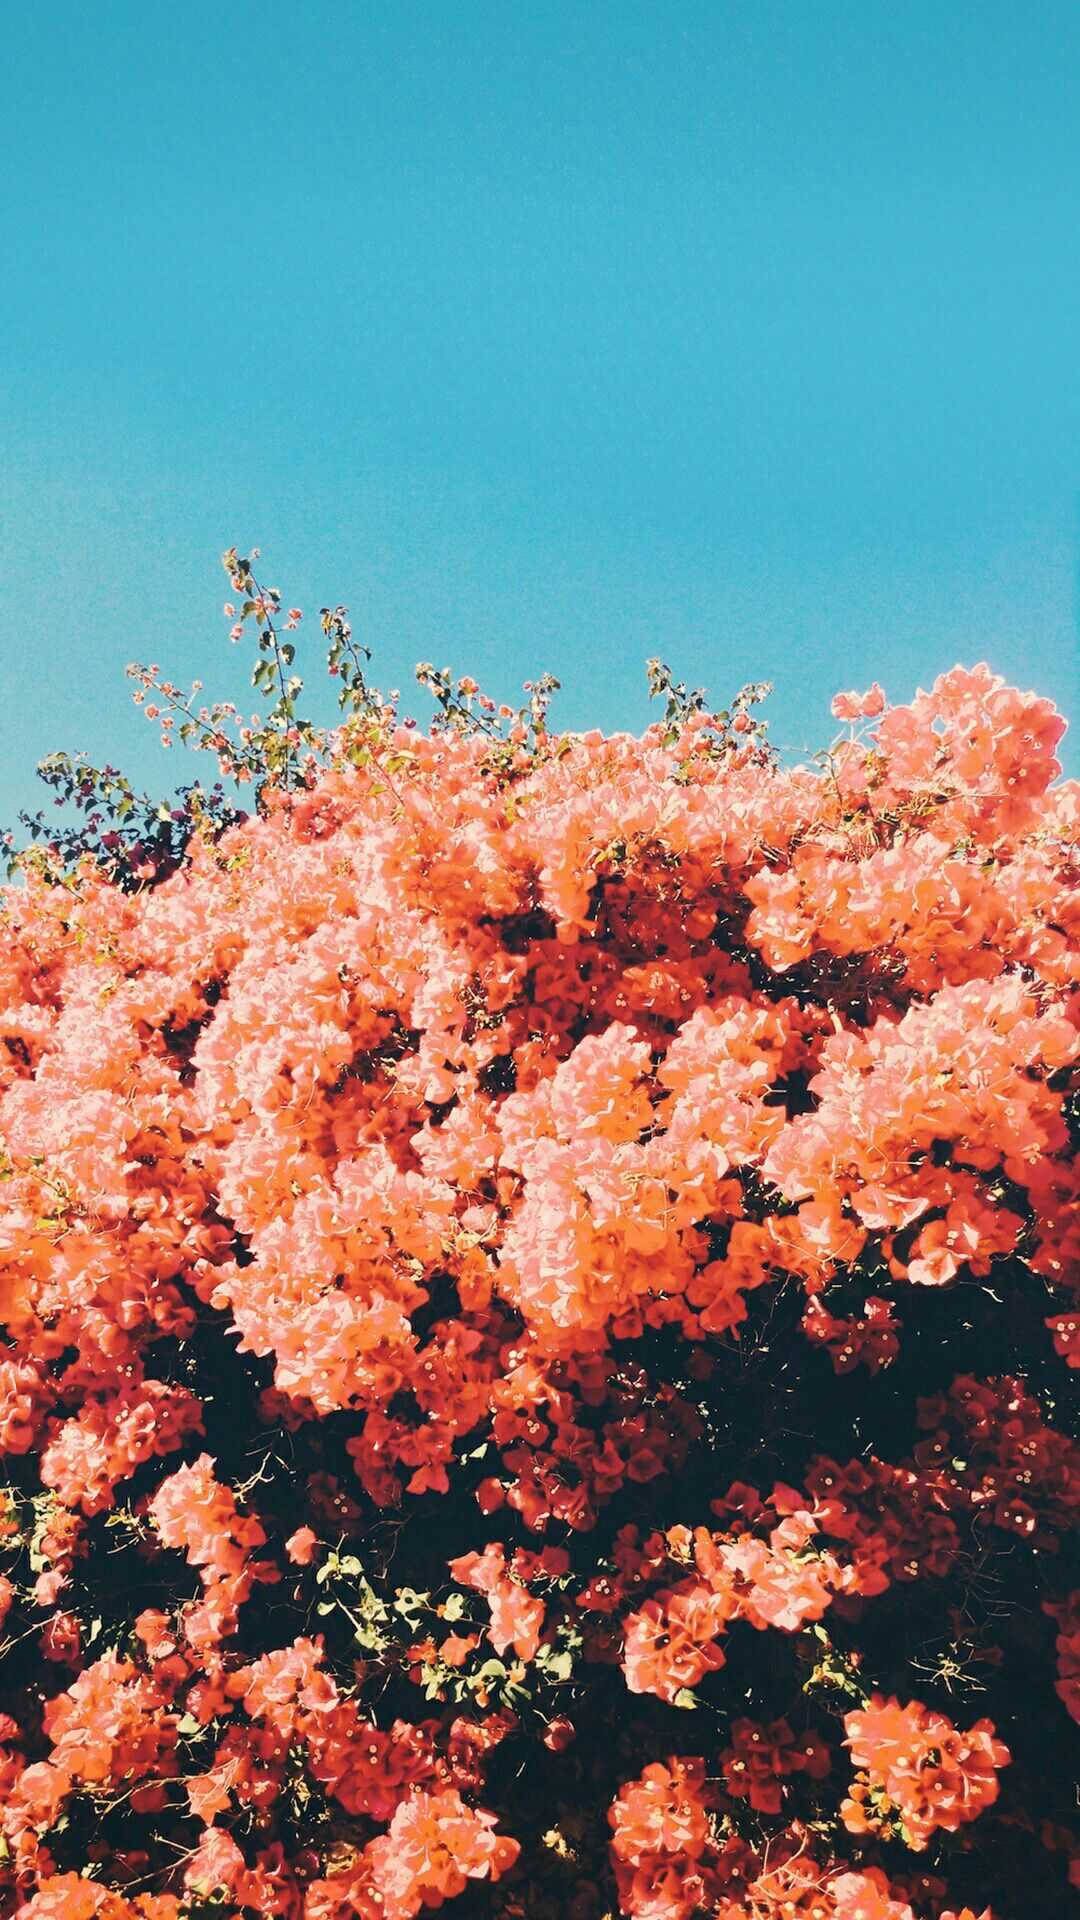 Aesthetic wallpaper for phone with flowers. - Spring, coral